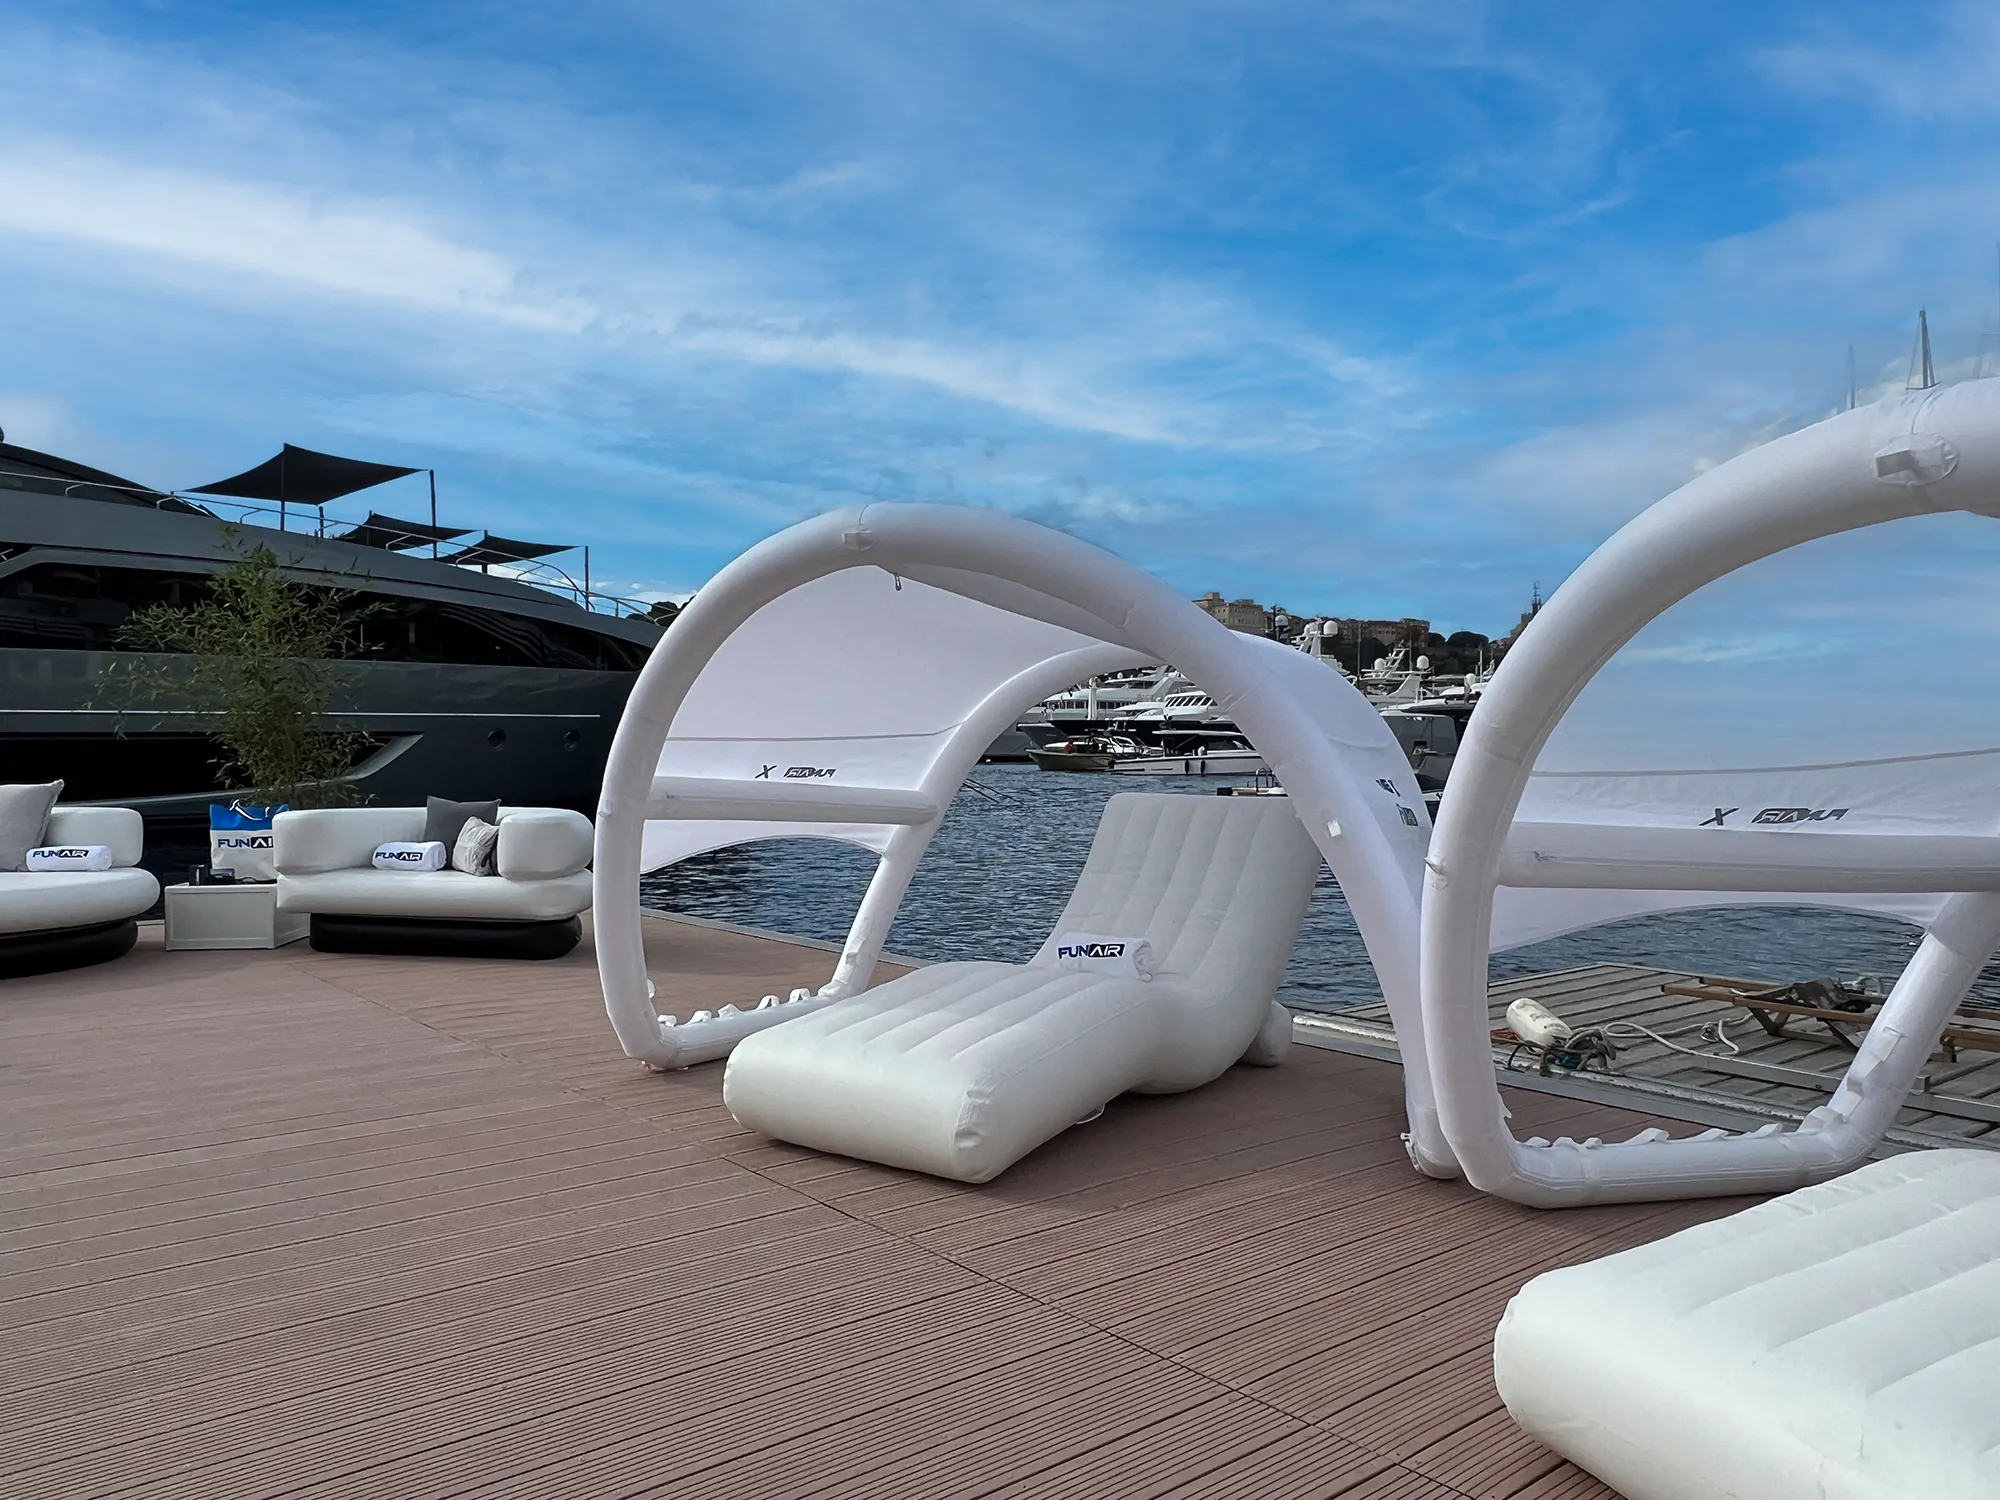 Wave Loungers Club Chair and X DeckTent Canopy at Monaco Yacht Show